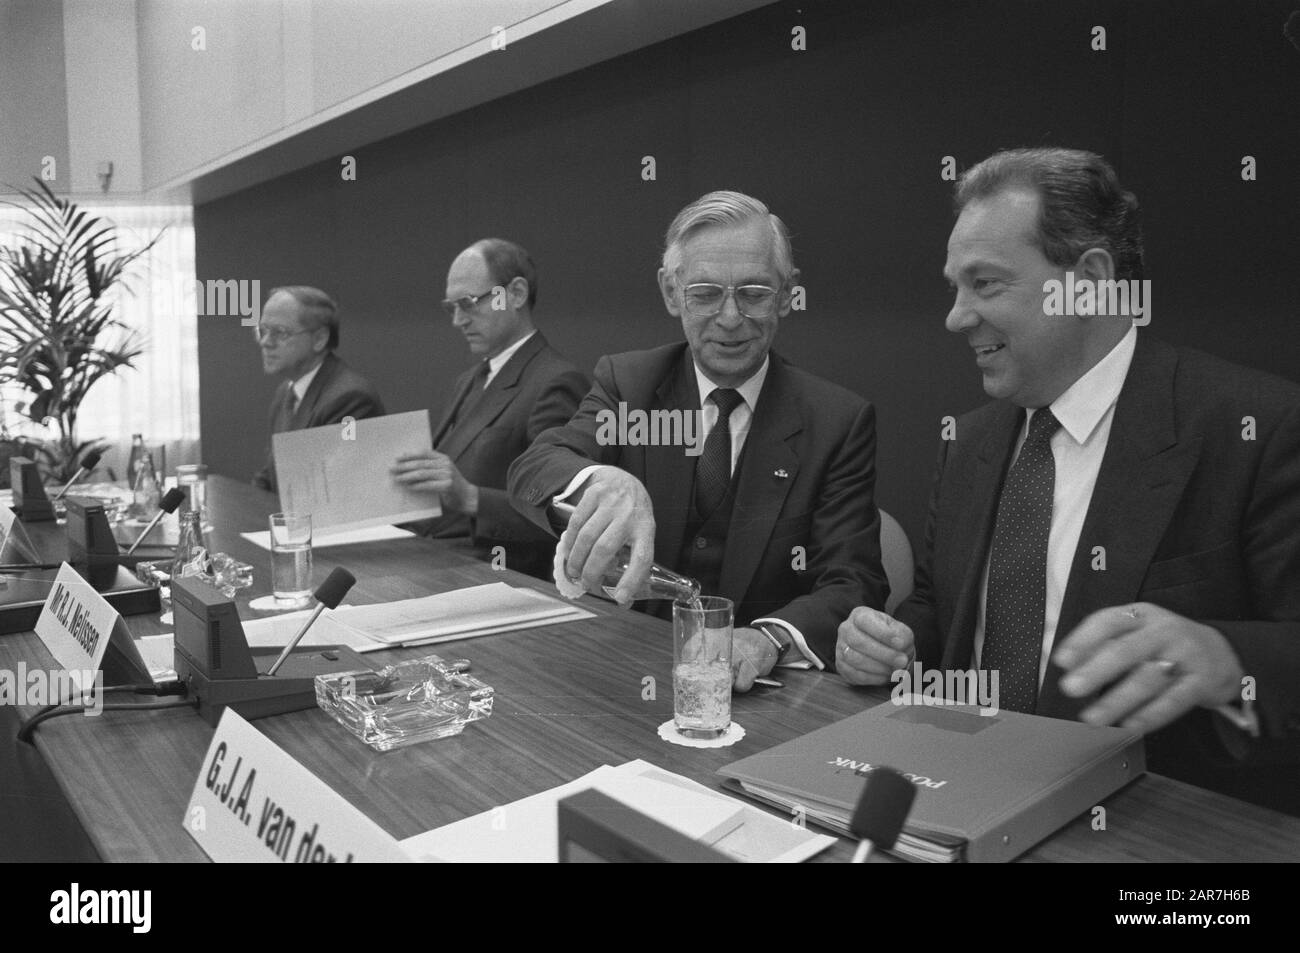 Press conference College of Consultations of the Joint Banks Date: 29 November 1988 Keywords: press conferences Personal name: Amro, Rabobank van de Lugt Institution name: Postbank  : Croes, Rob C./Anefo Stock Photo